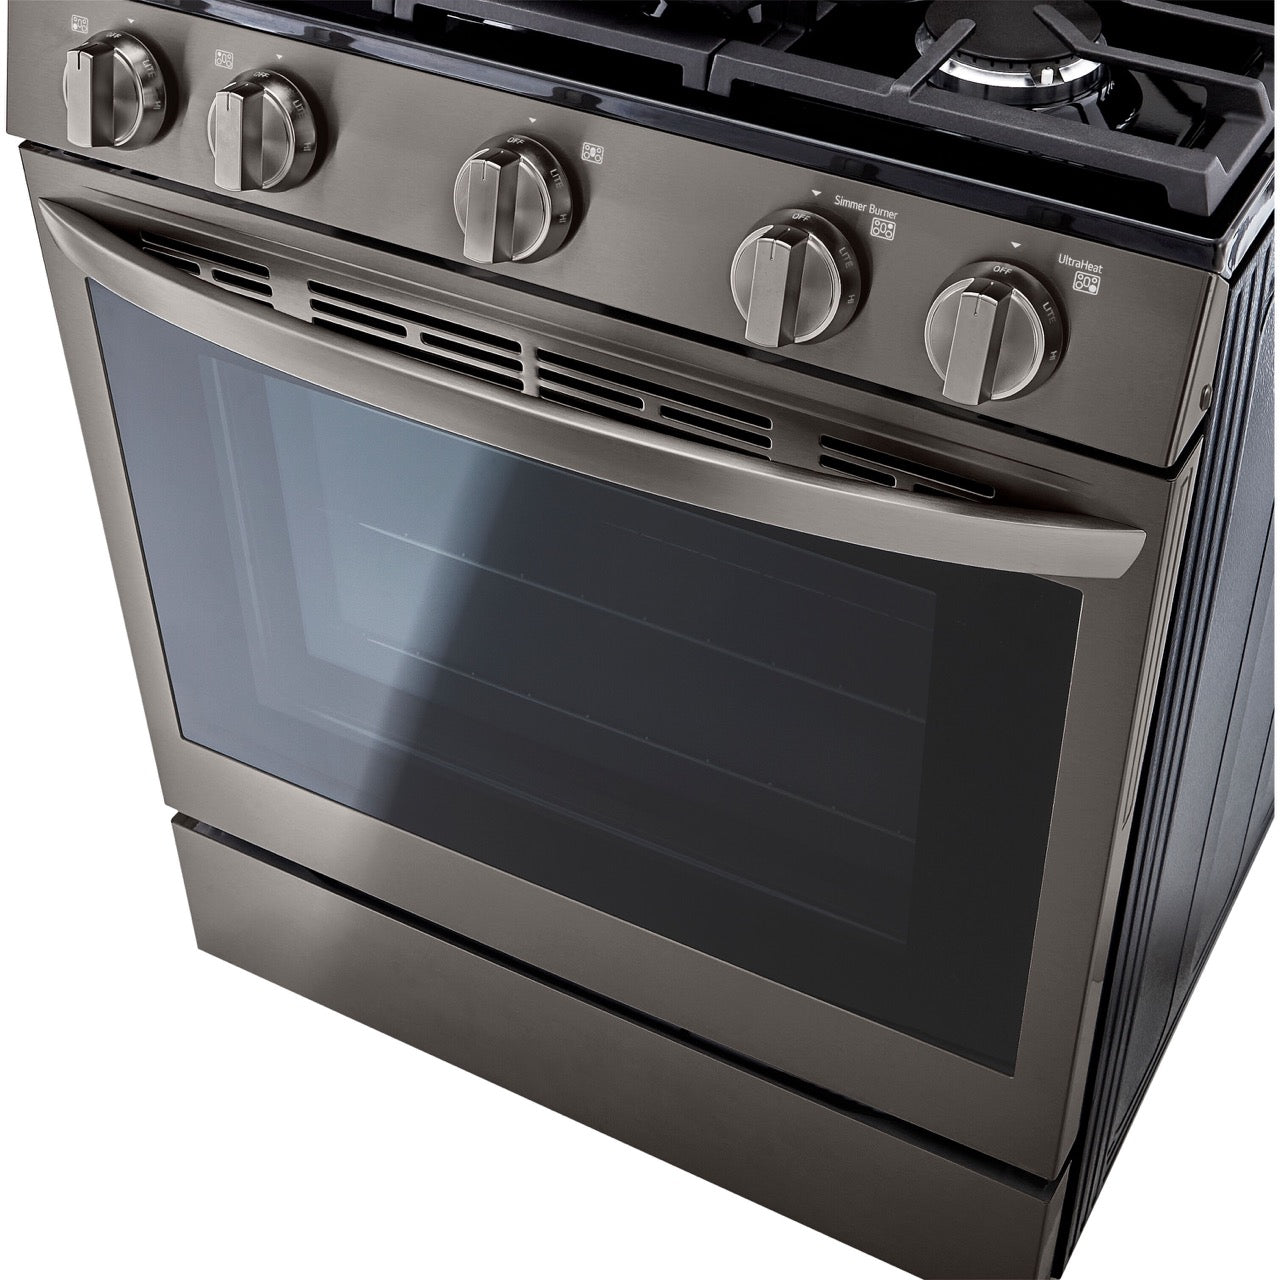 LG 5.8-Cu. Ft. Gas Convection Smart Range with AirFry and InstaView, Black Stainless Steel (LRGL5825D)